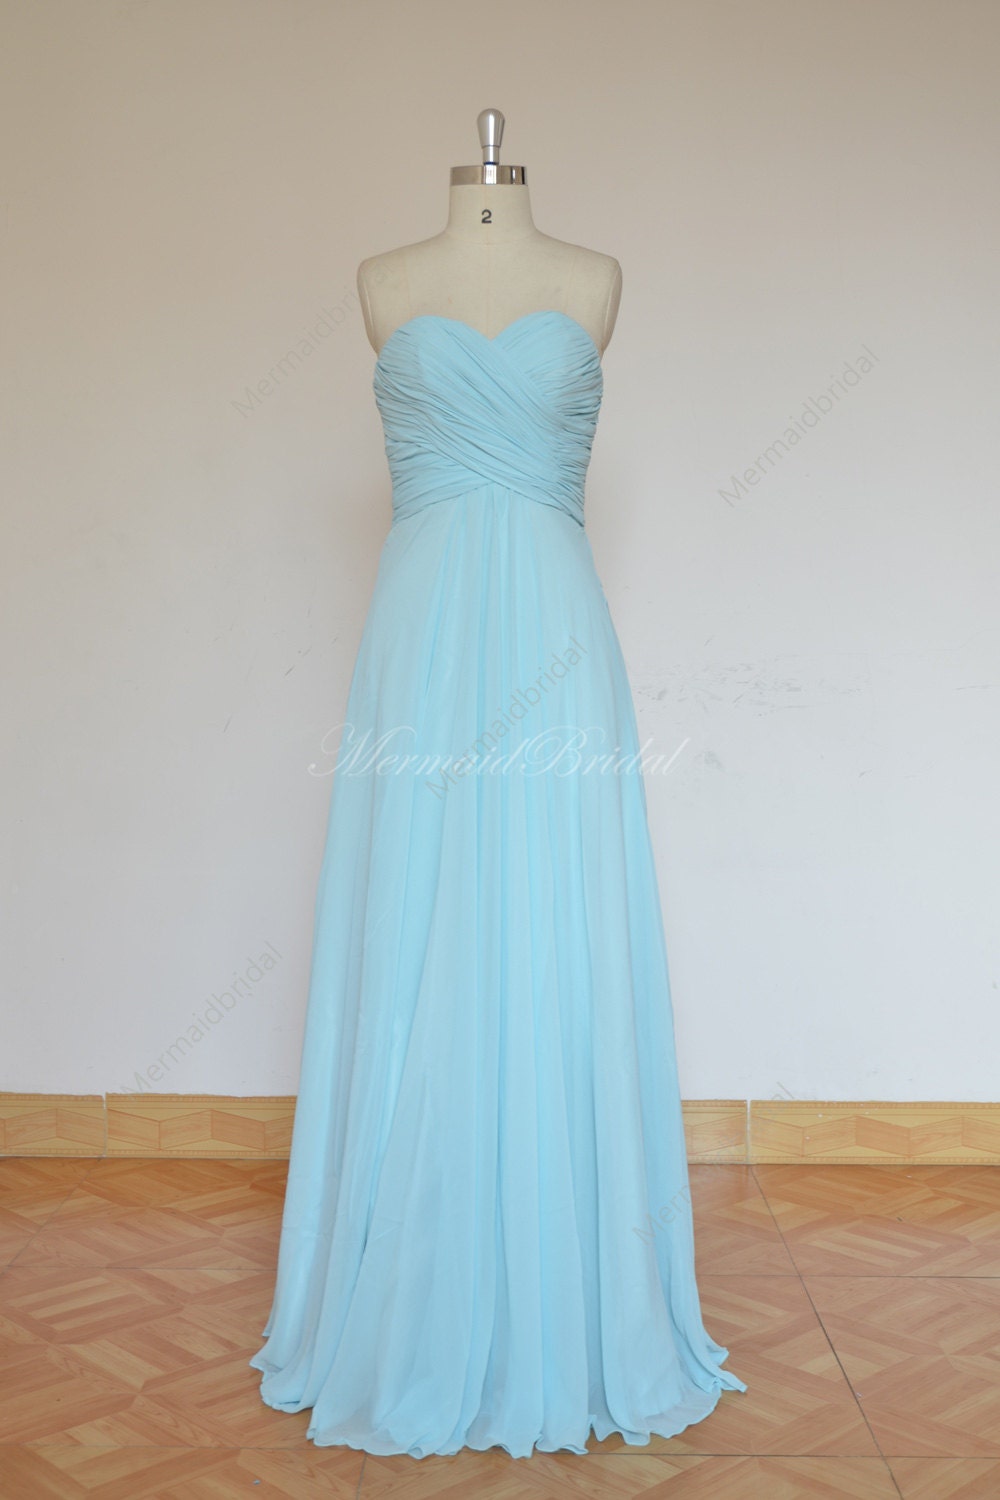 Simple light blue prom dress bridesmaid dress with sweetheart